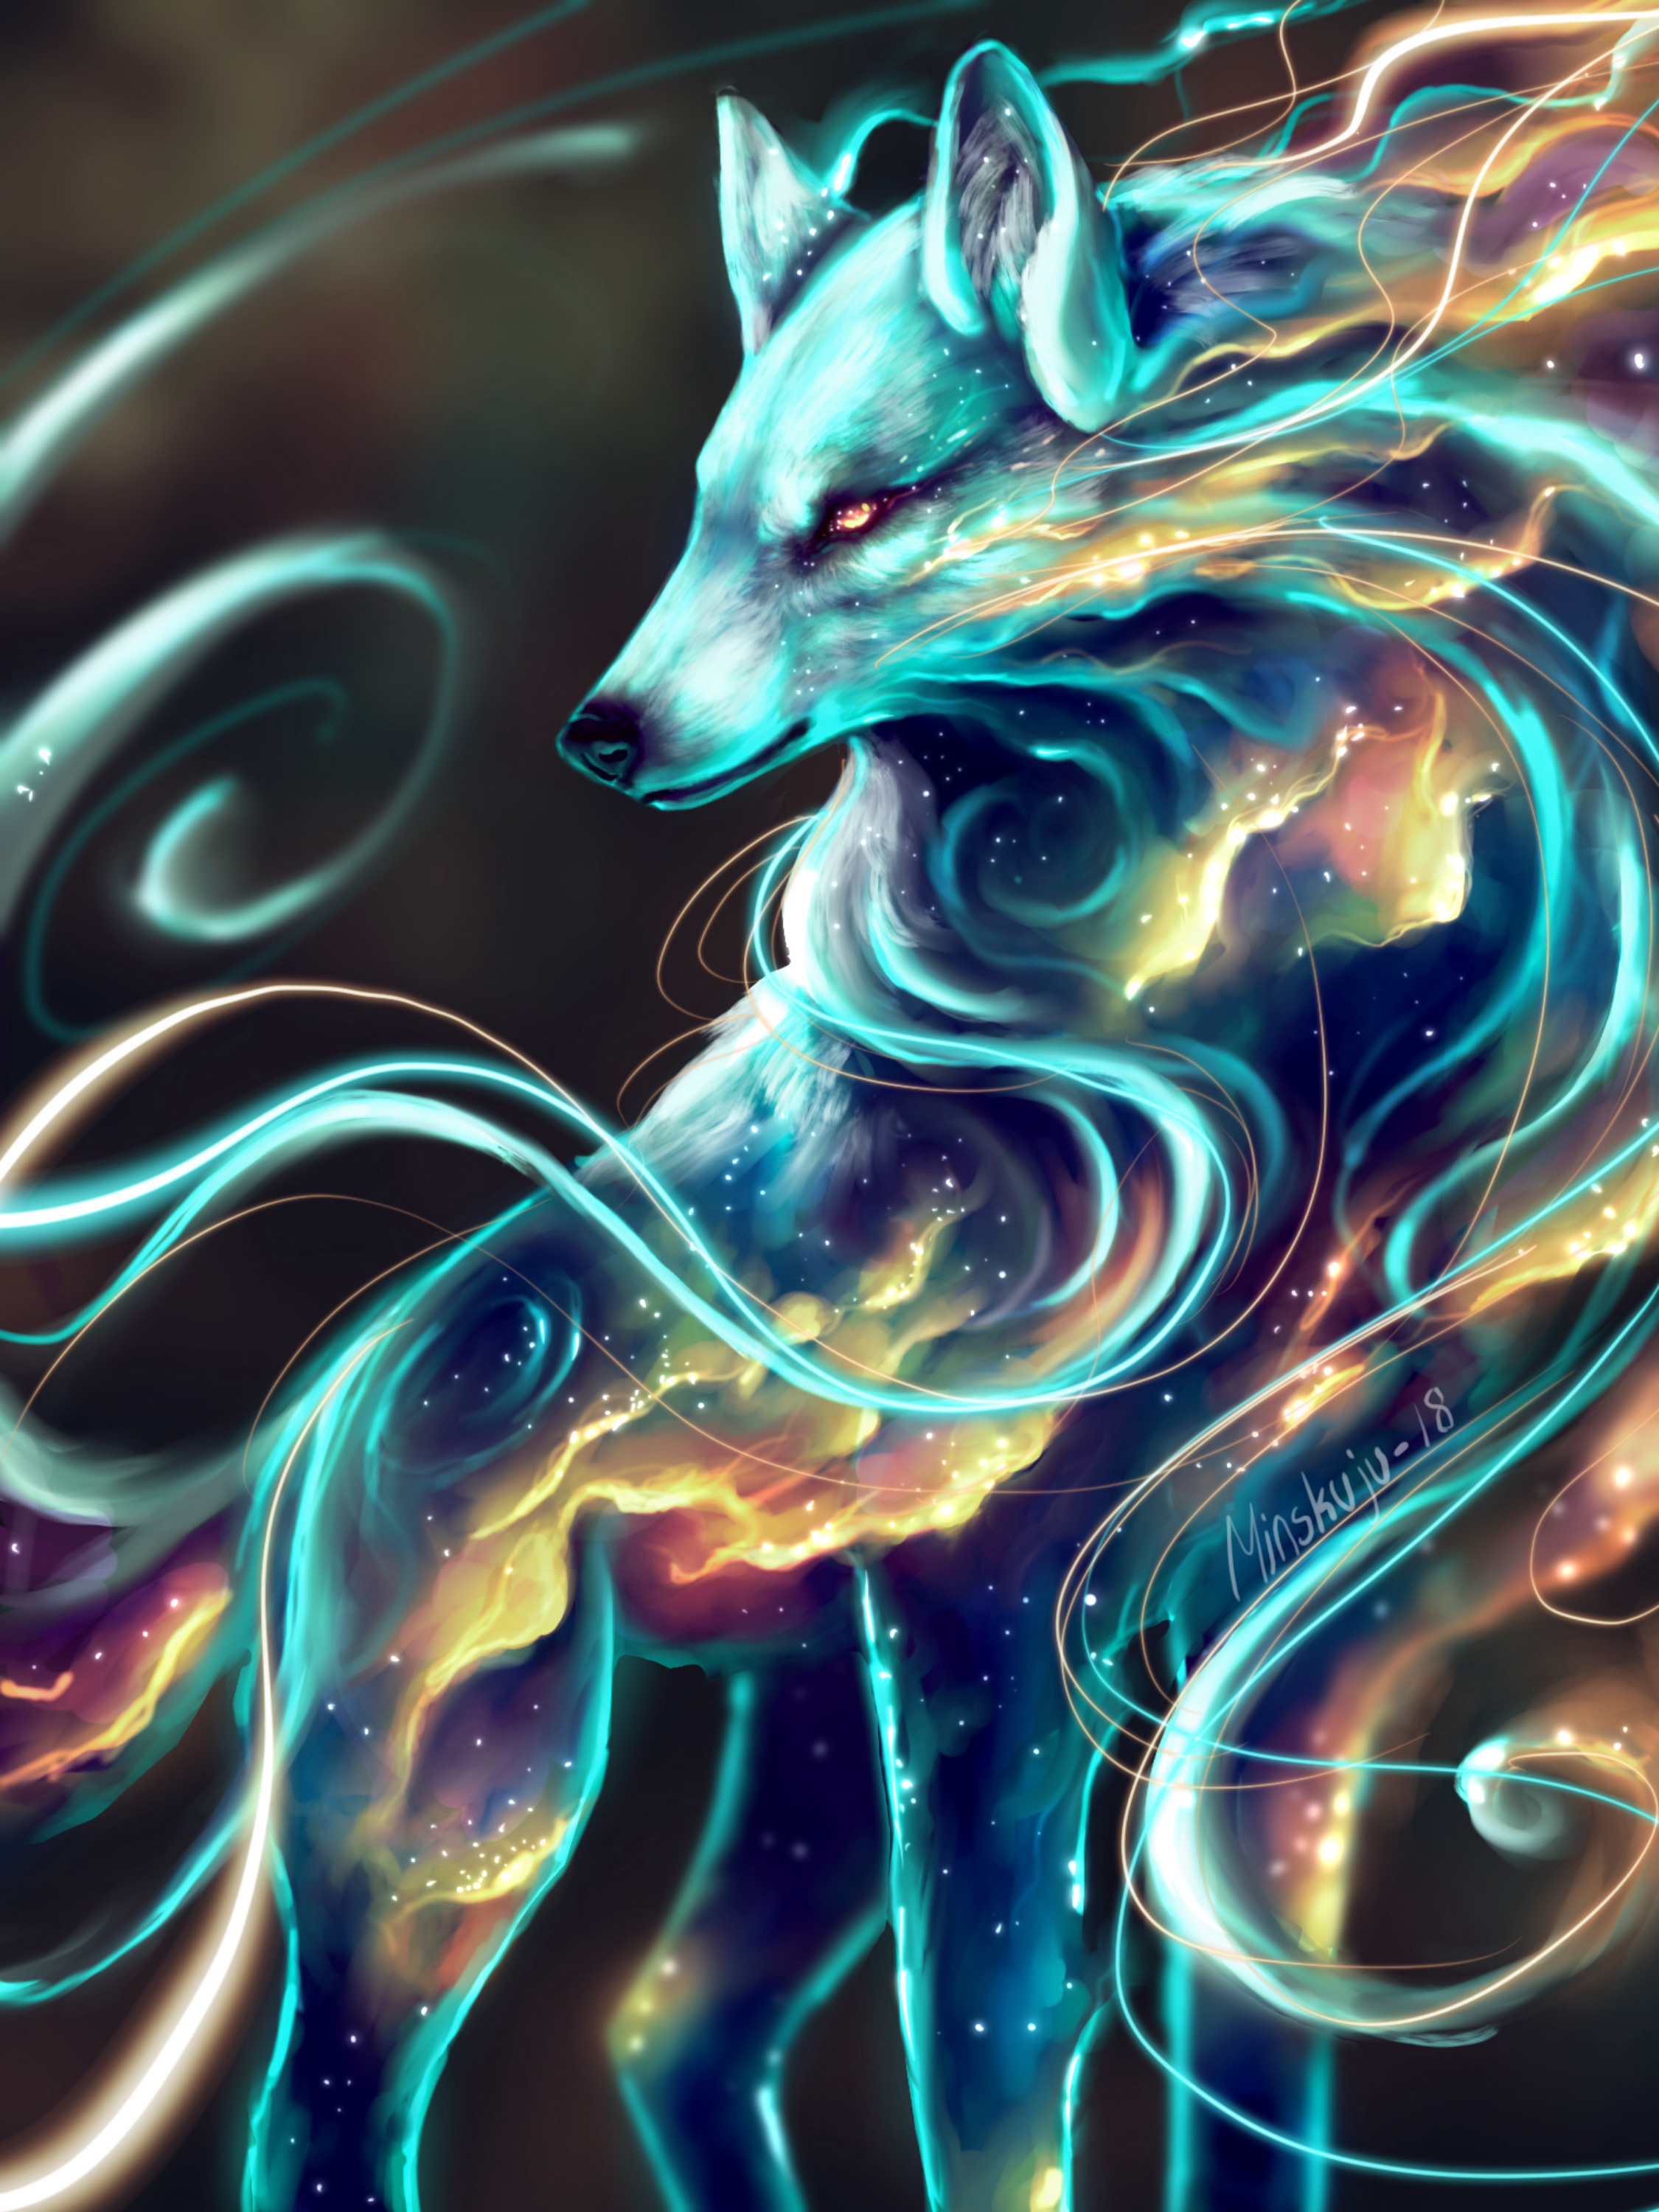 wolf, being, art, fantastic, space, creature, cosmic wallpaper for mobile